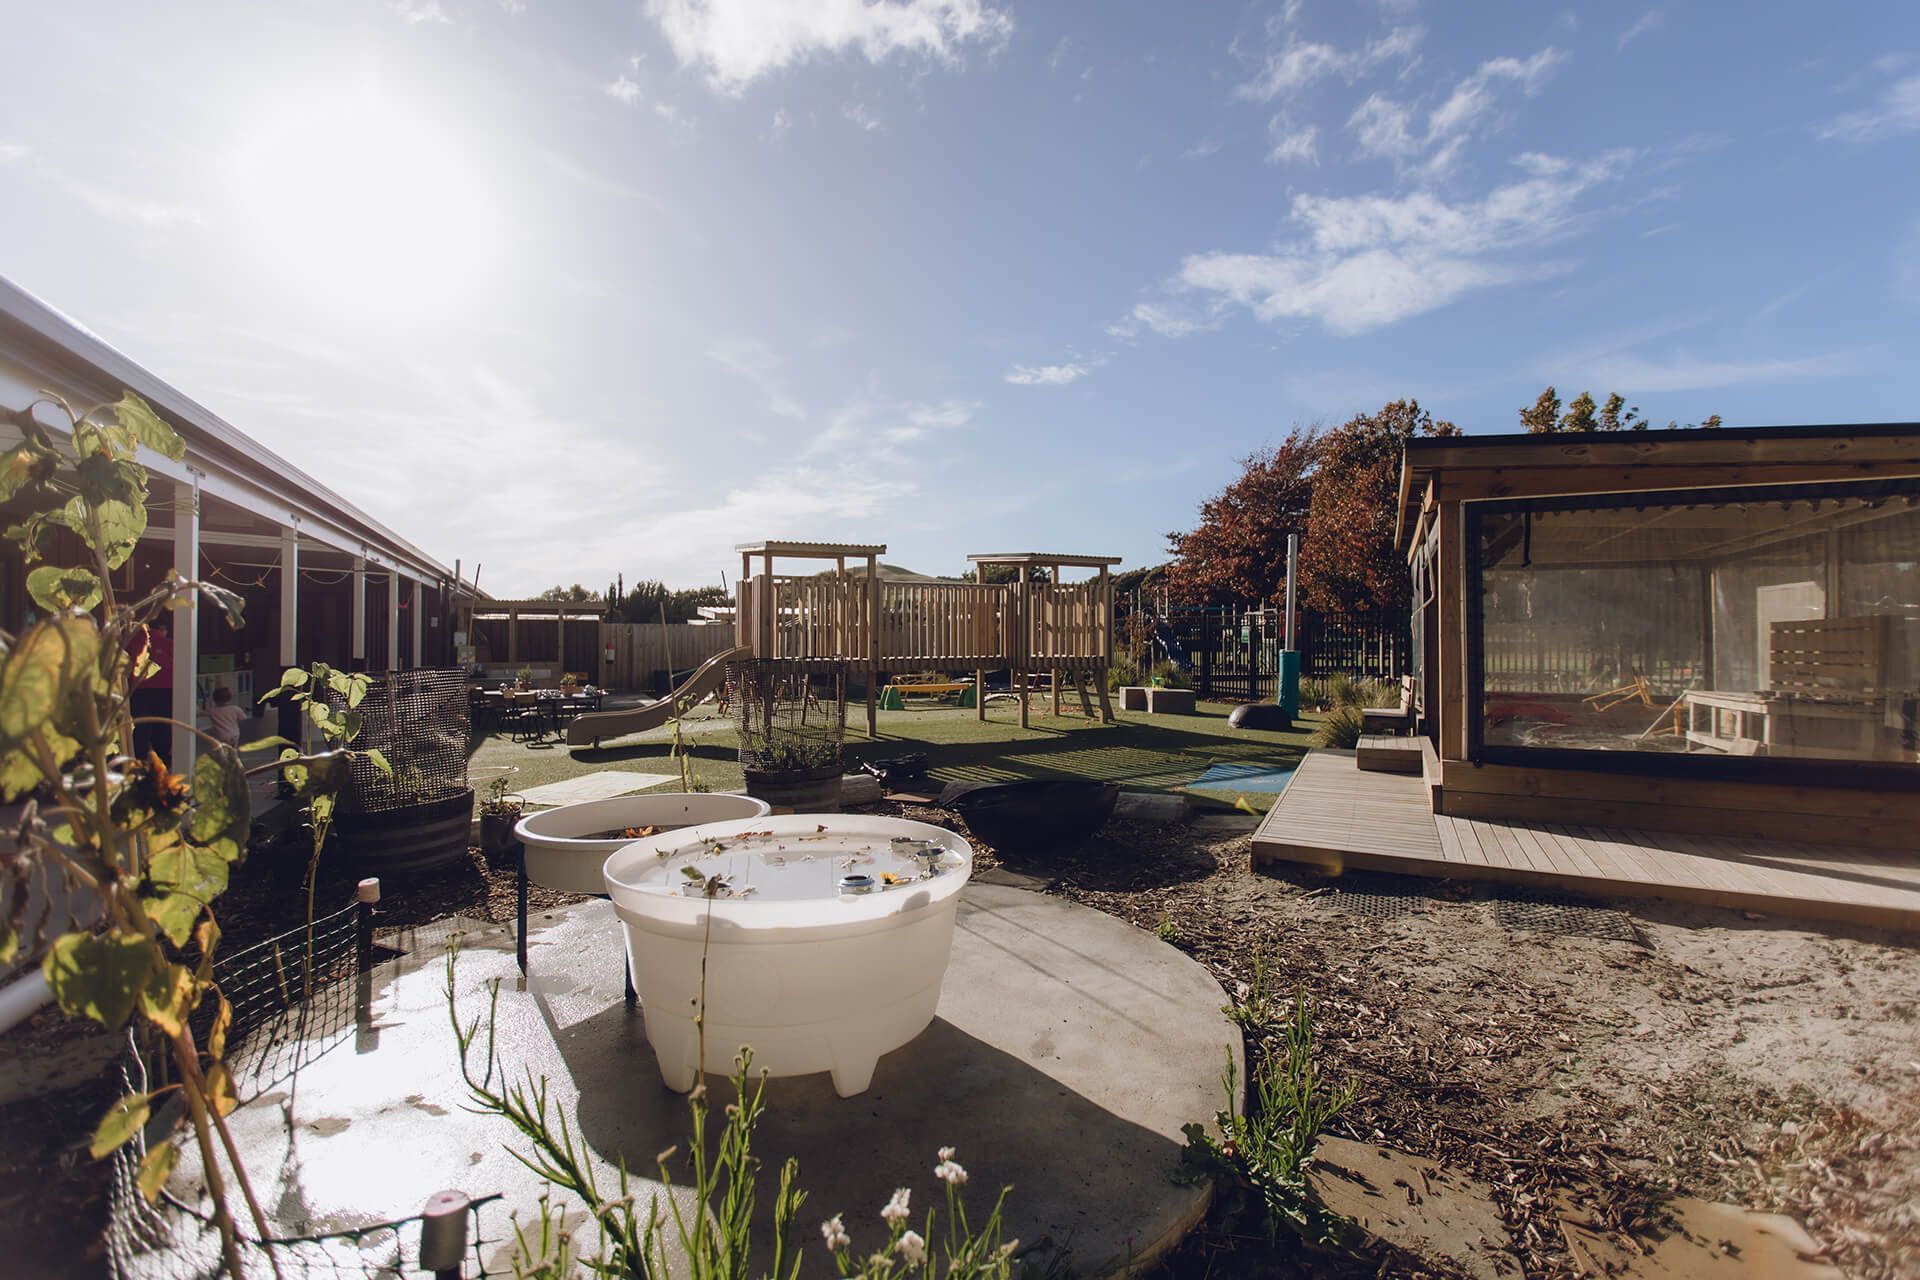 Awatere Early Learning Centre in Seddon, Marlborough, New Zealand